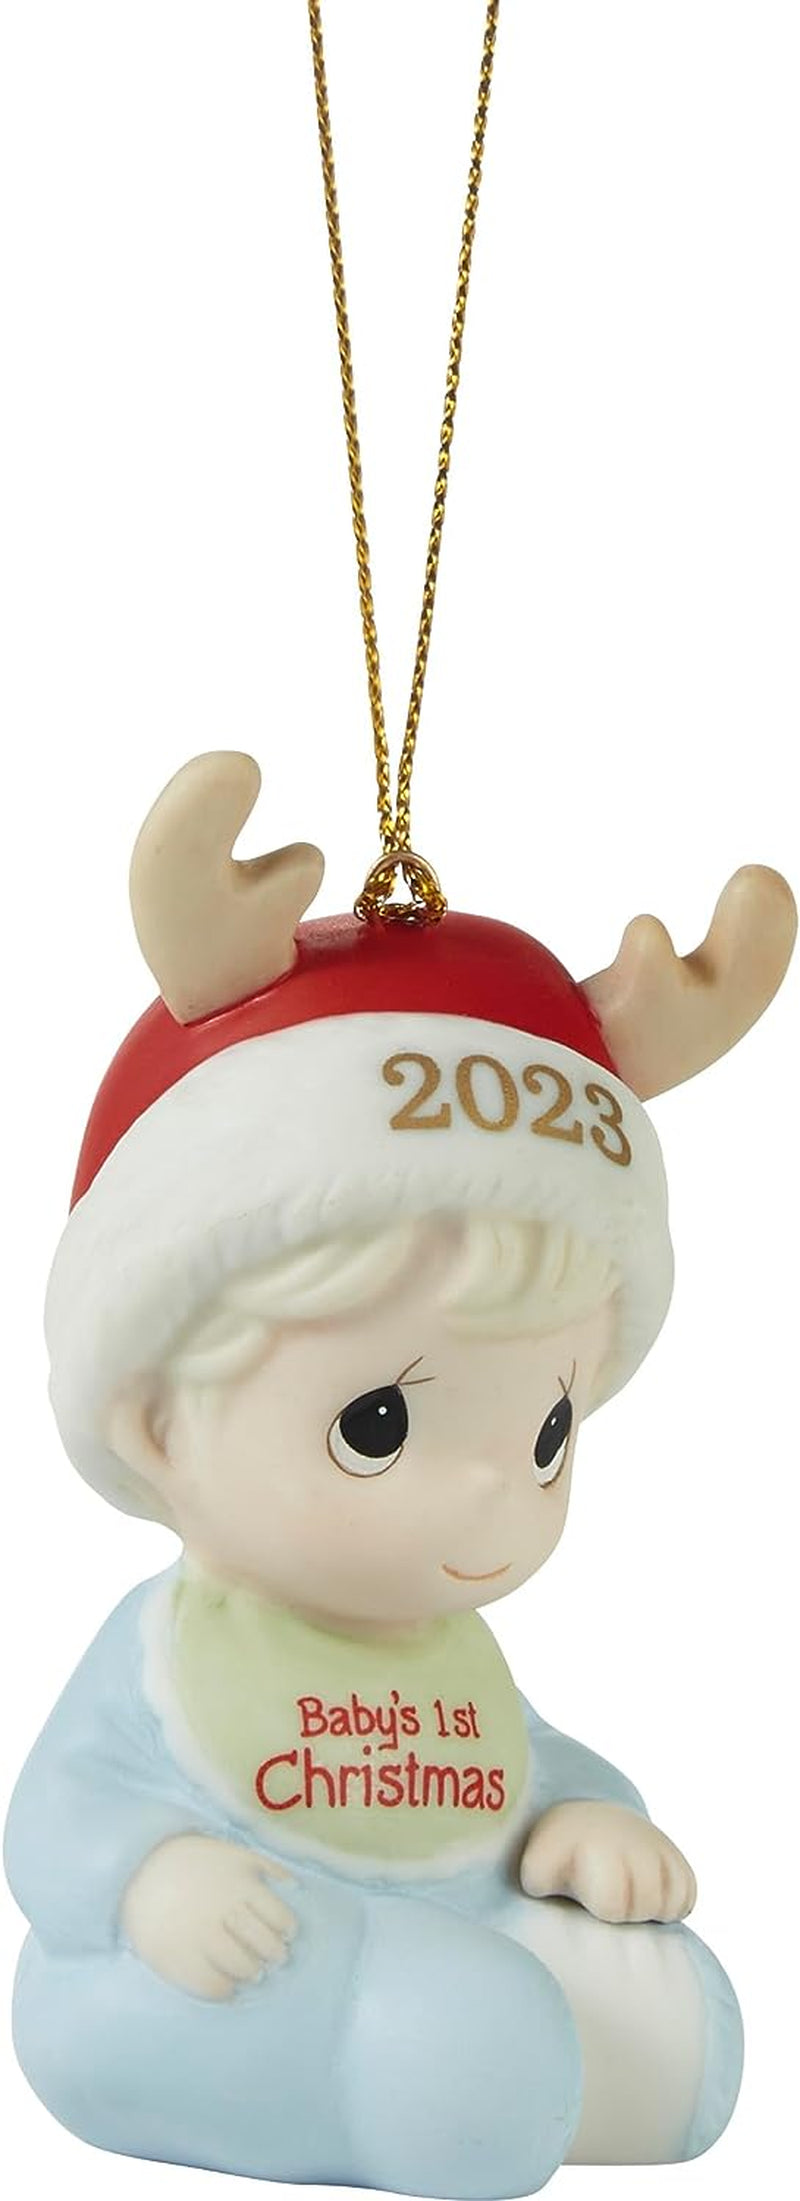 Precious Moments 231006 Baby’S First Christmas 2023 Dated Boy Bisque Porcelain Ornament  Precious Moments   